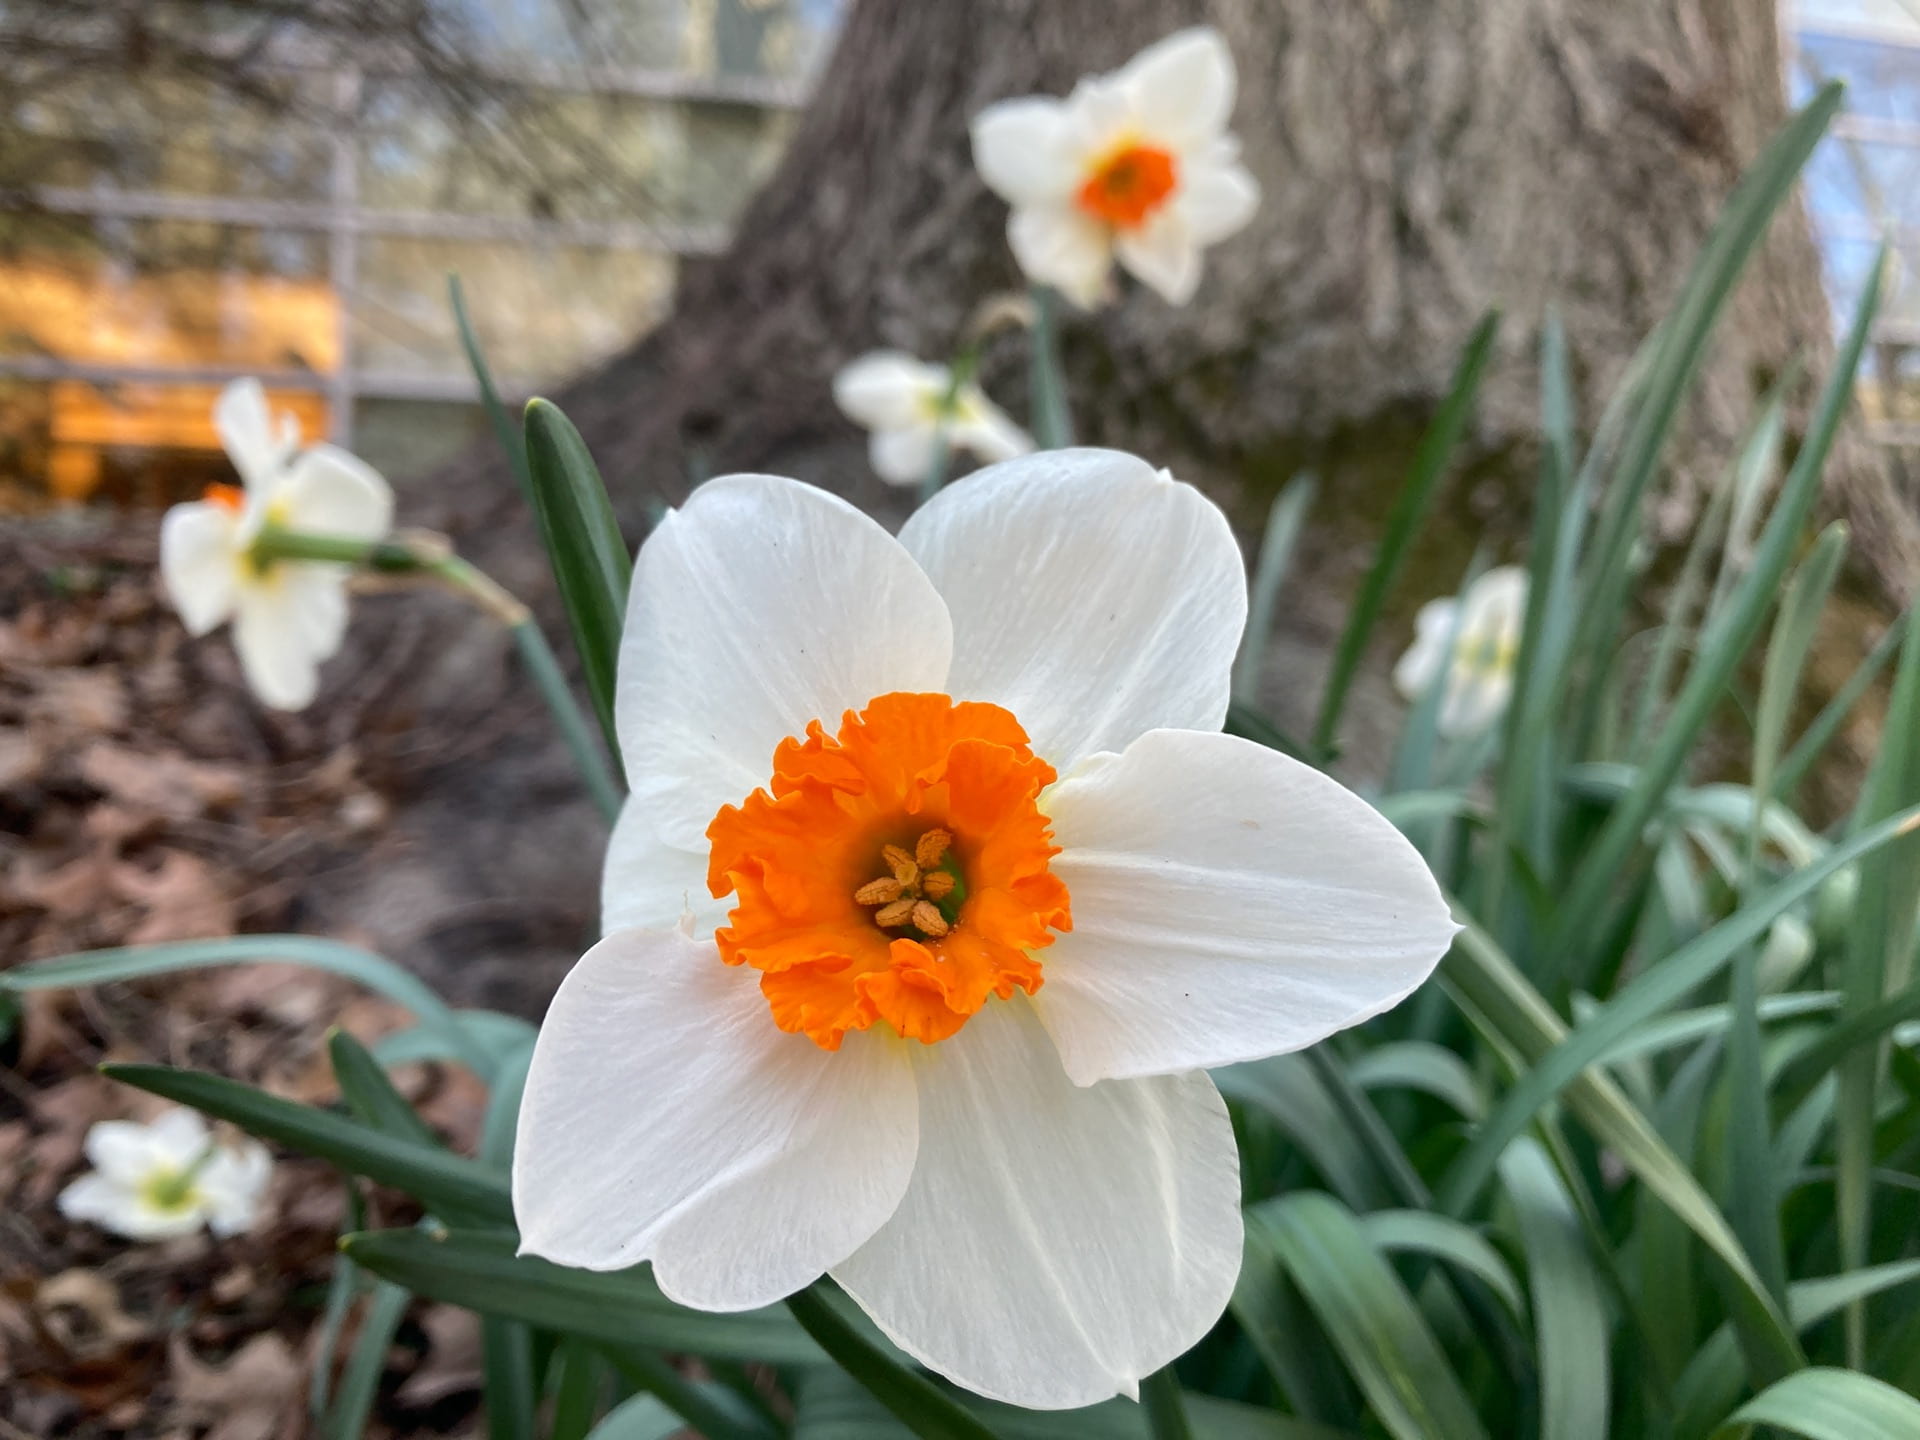 Narcissus 'Barrett Browning' blooms at the base of a red oak, Quercus rubra.